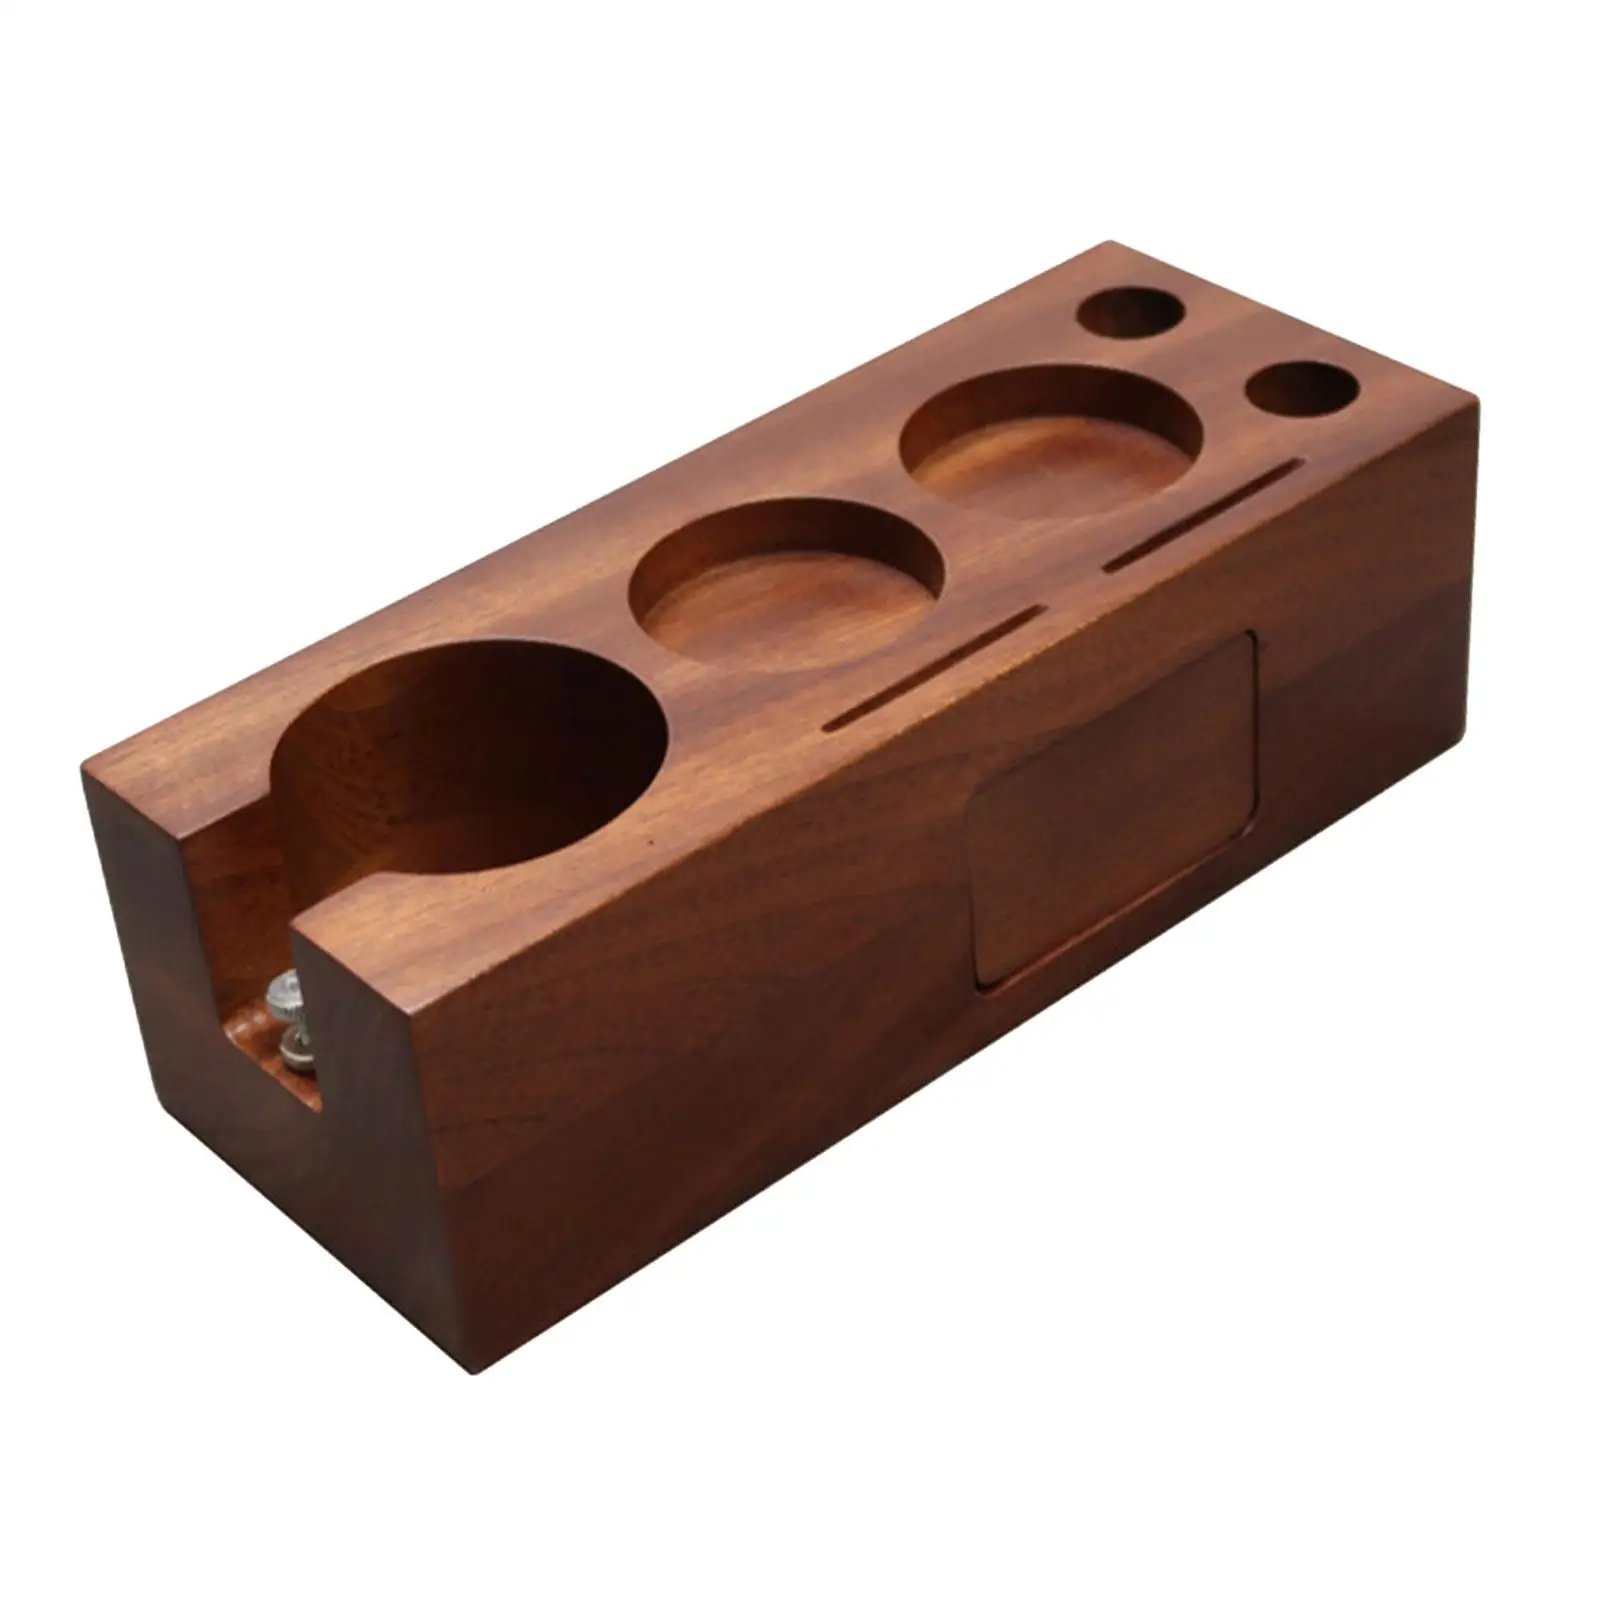 Wood Manual Station Accessories 3 Holes Espresso Tamper Mat Stand